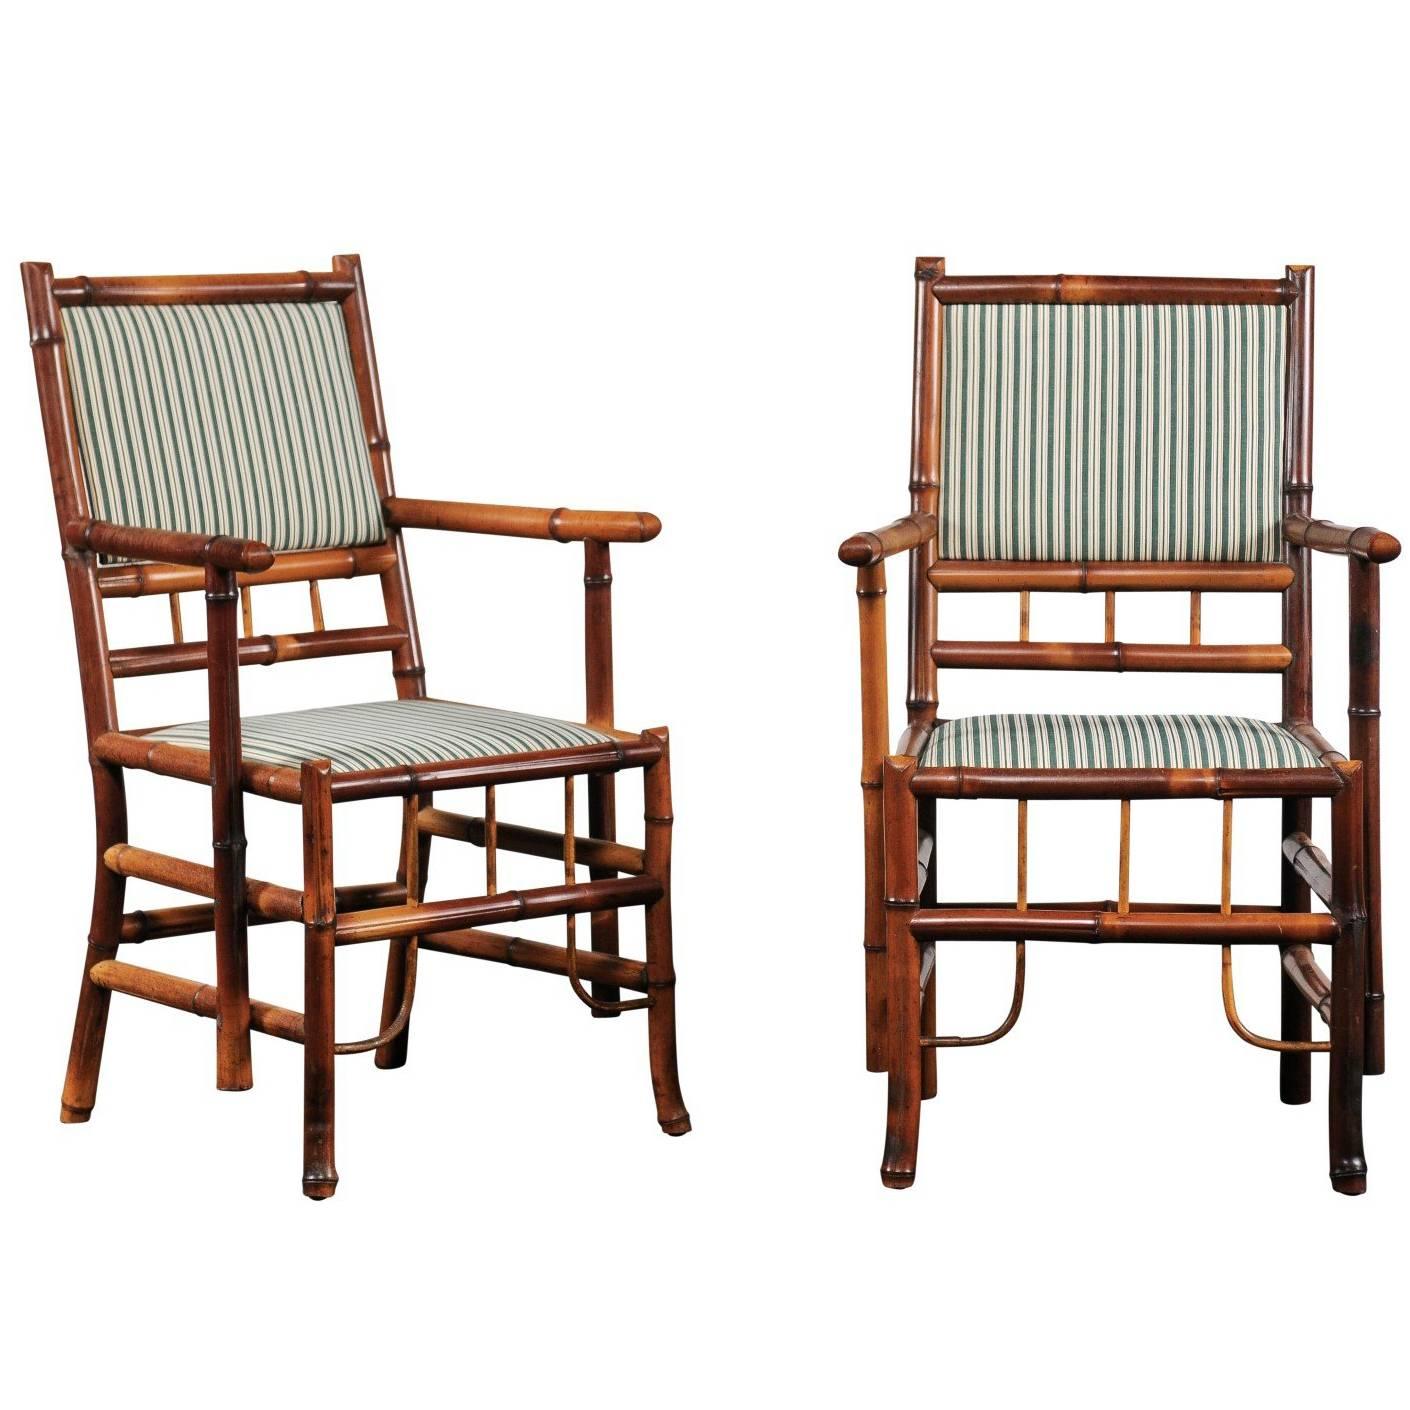 Pair of 19th-20th Century English Bamboo Armchairs